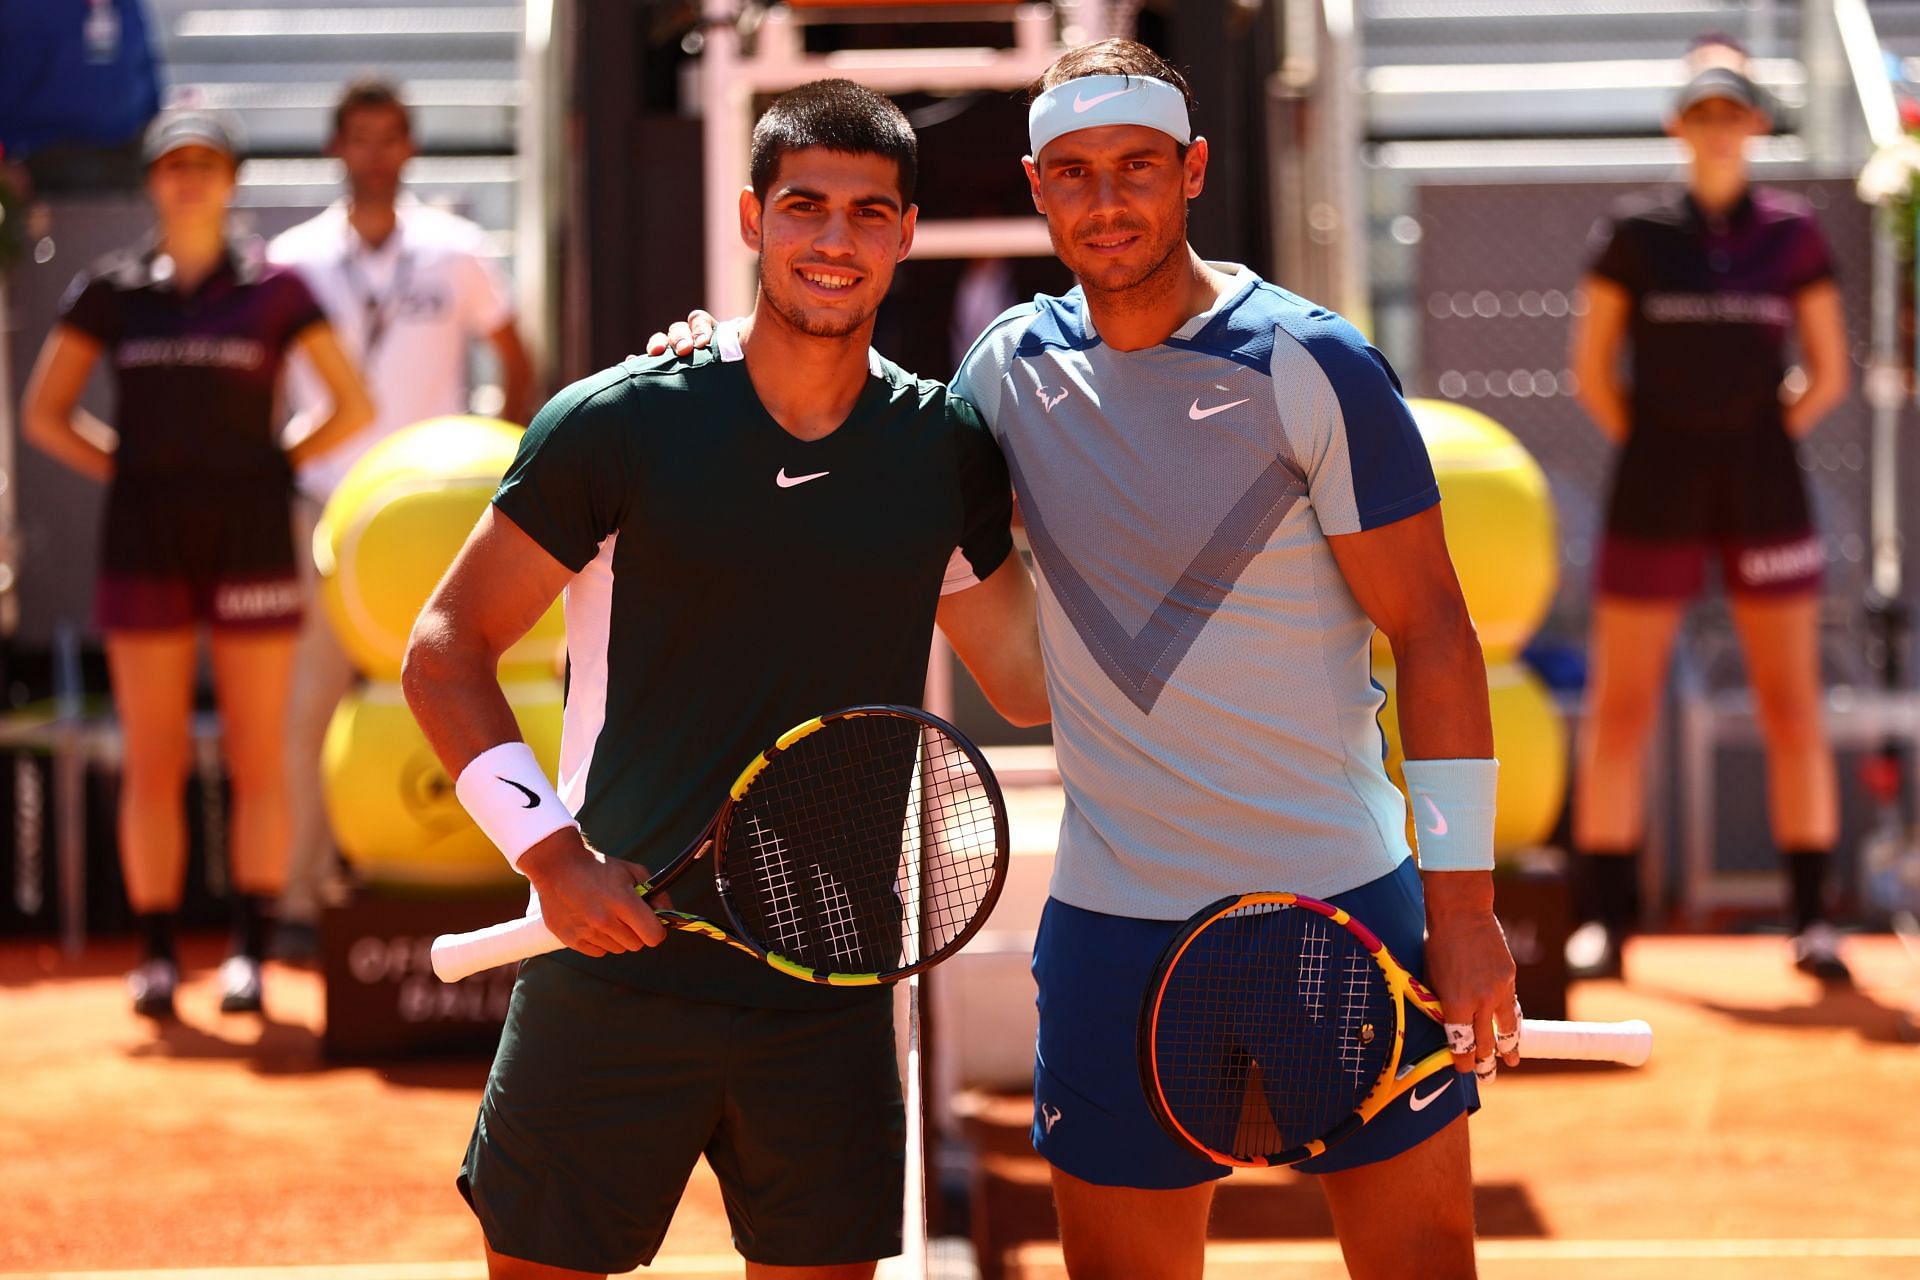 Carlos Alcaraz (L) and Rafael Nadal before their match at the 2022 Mutua Madrid Open.